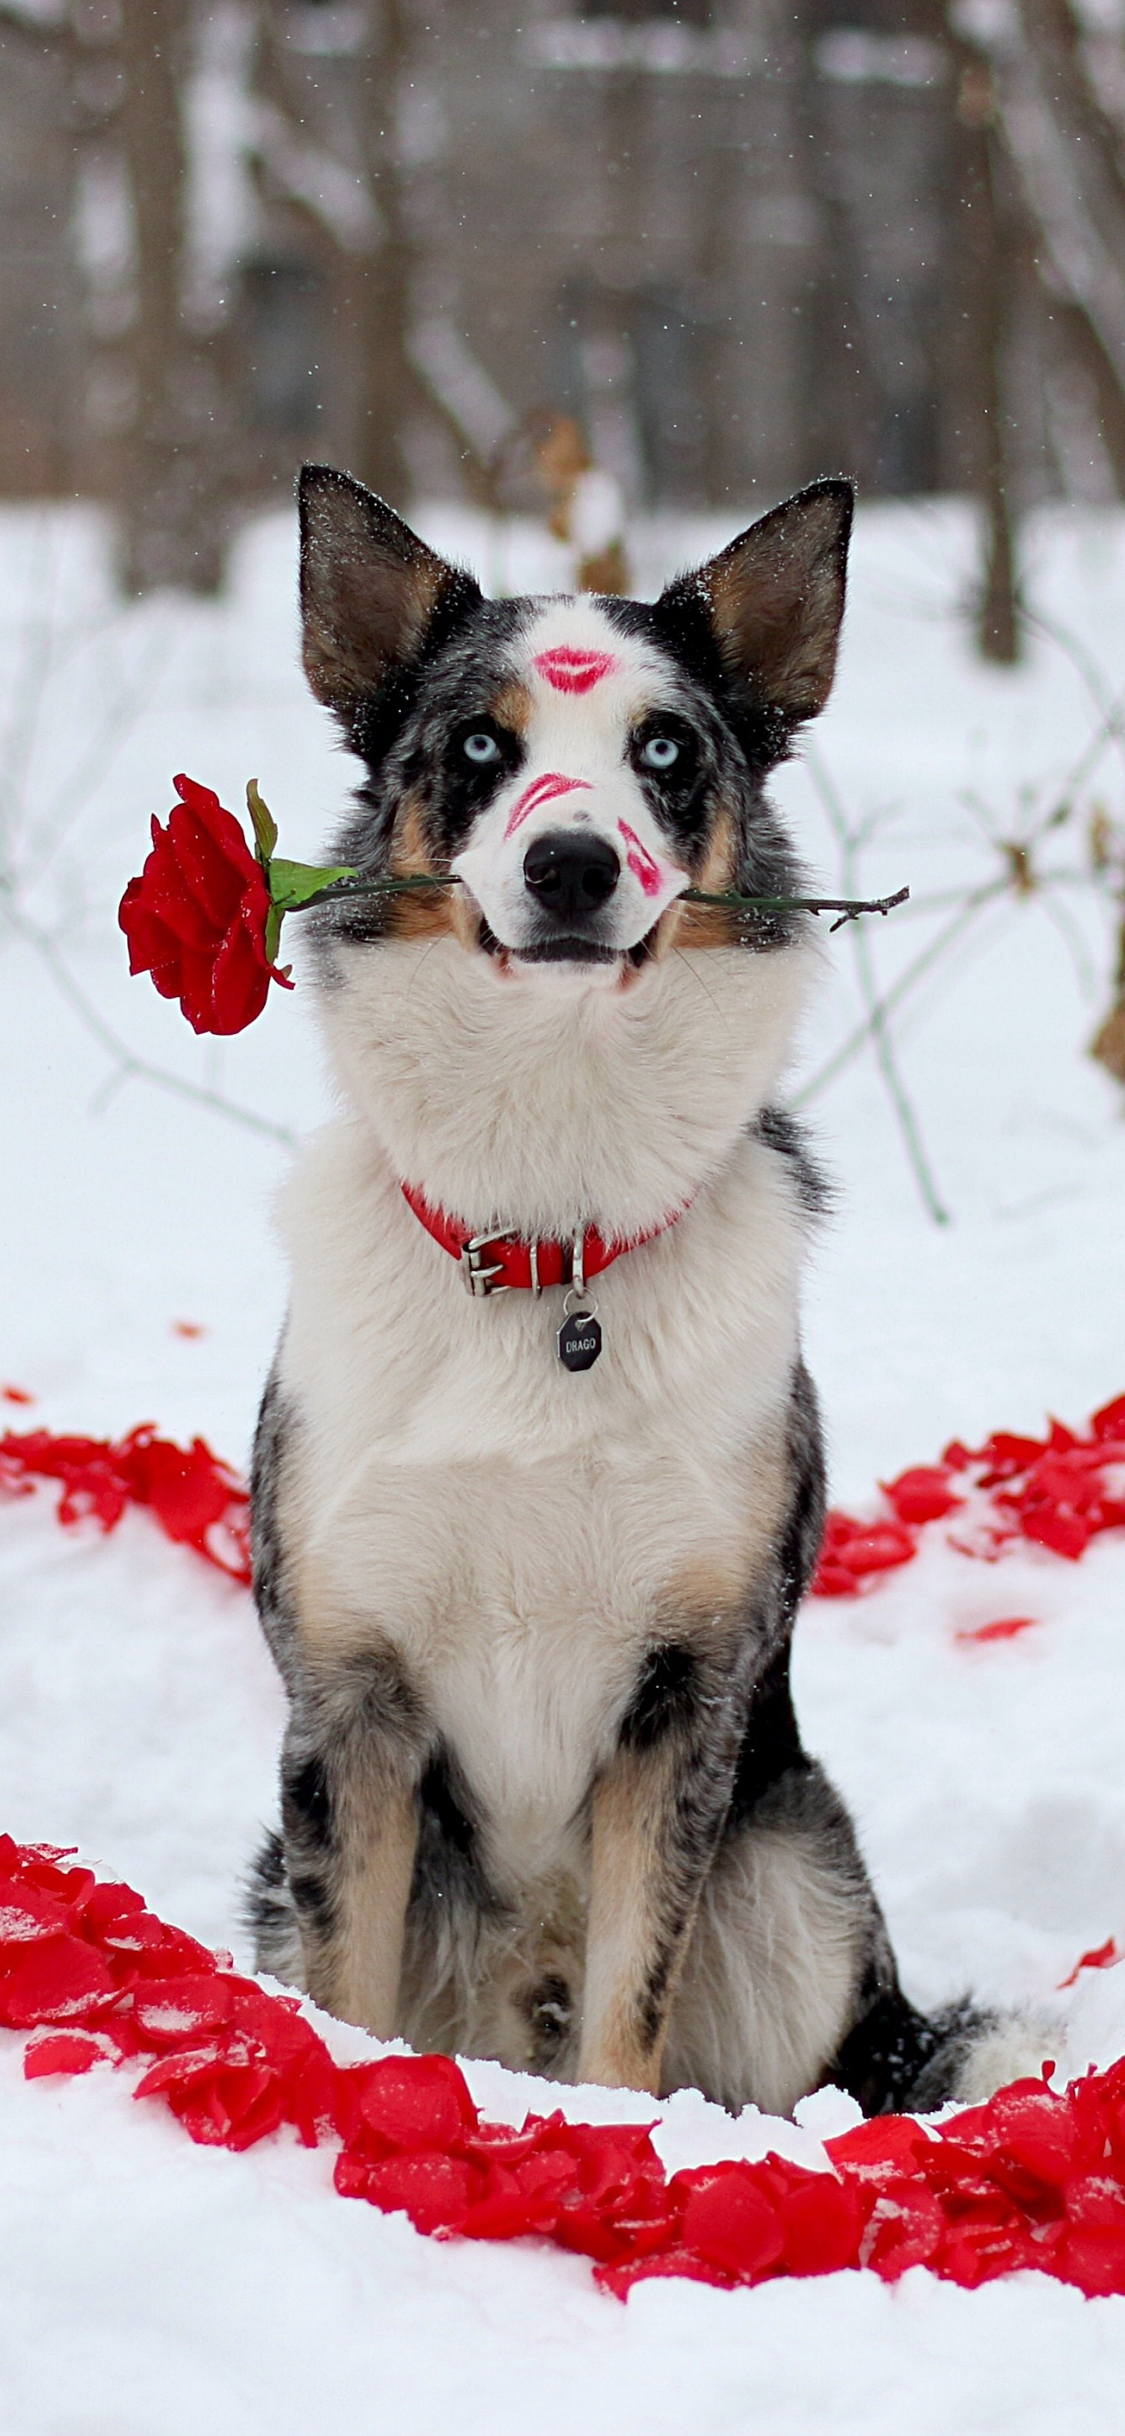 1125x2436 Free download Dog on Valentines Day Watch dog breeds backgrounds for your phone [4190x2827] for your Desktop, Mobile \u0026 Tablet | Explore 47+ Valentine's Day Dog Wallpaper | Valentine Wallpapers For Desktop